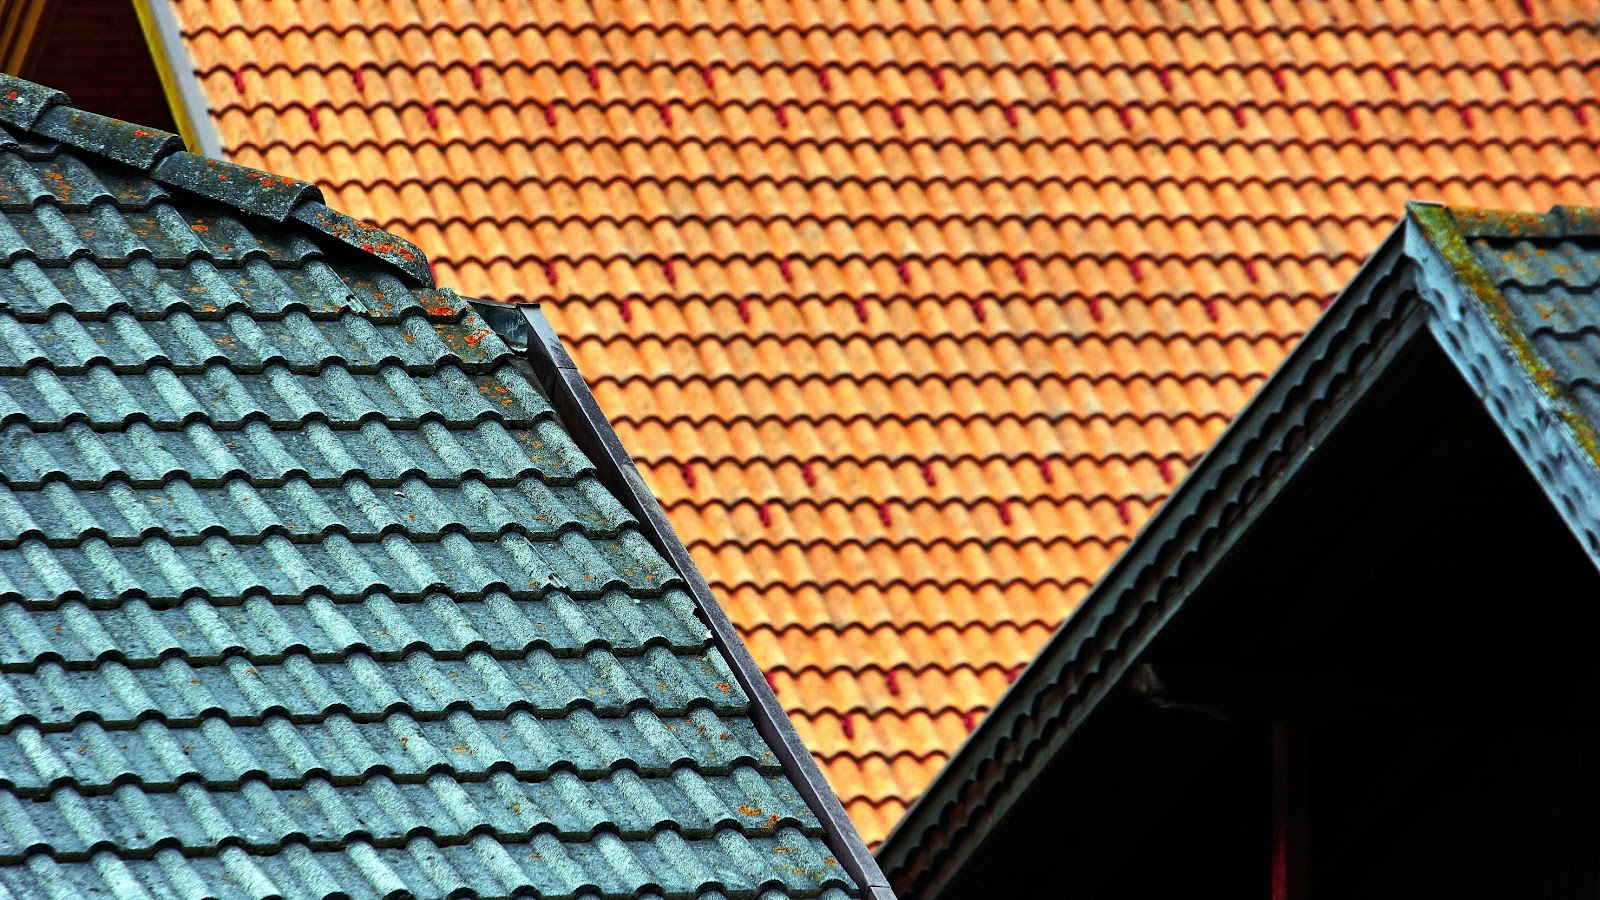 How to Choose Quality Roofing Materials